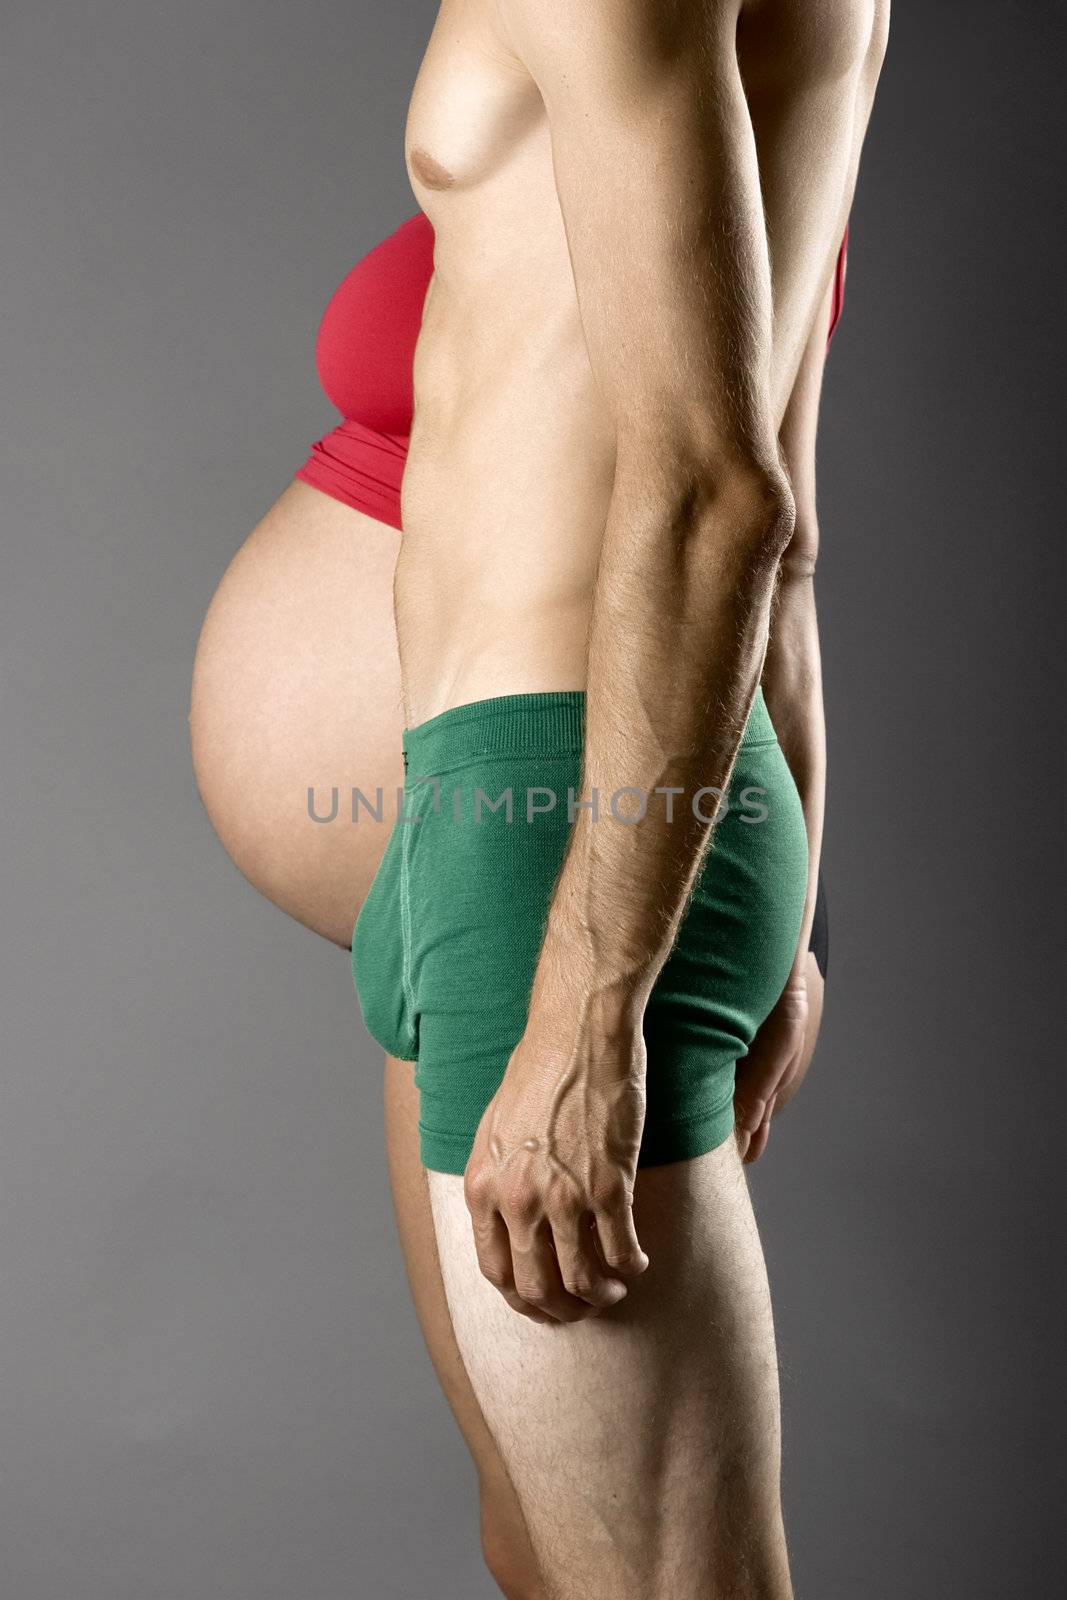 Pregnancy Concept - A nine months pregnant woman and a very skinny man